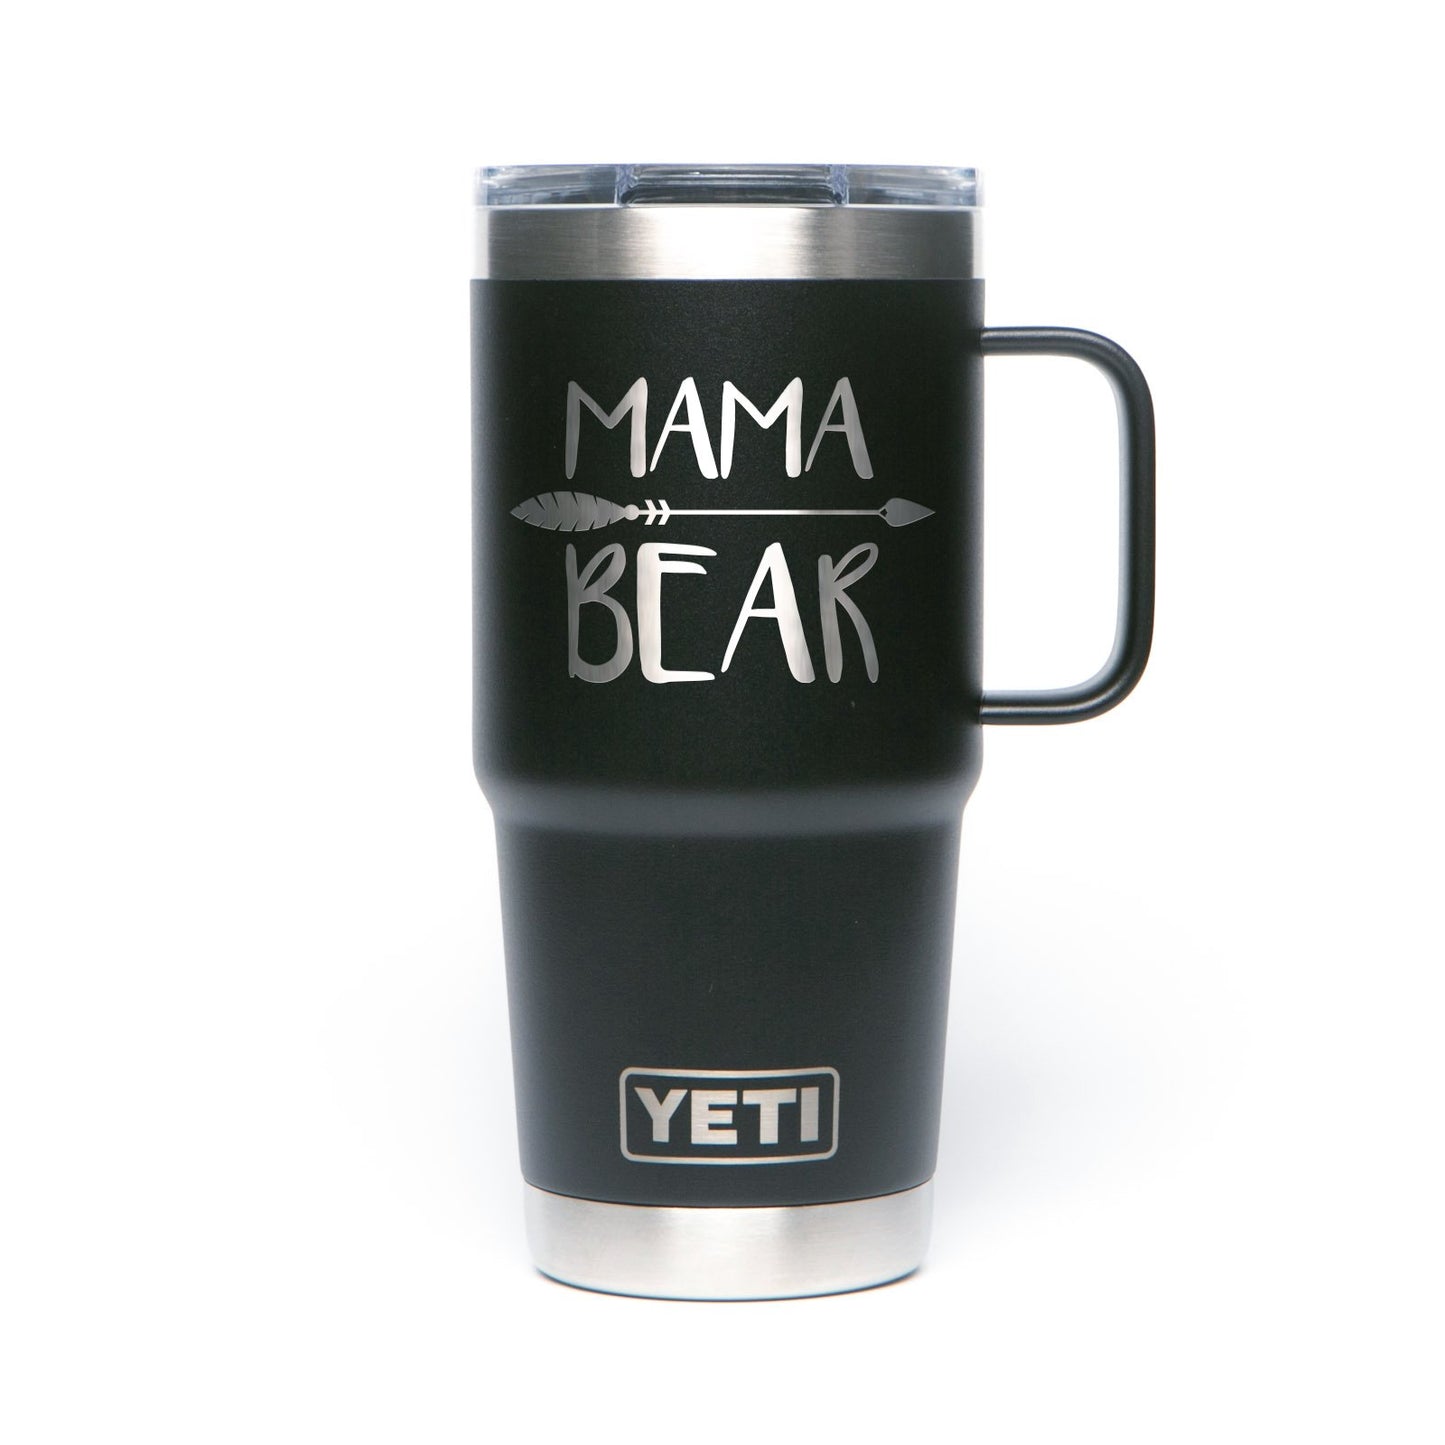 YETI Rambler 20 oz Travel Mug, Stainless Steel, Vacuum Insulated with Stronghold  Lid, Black